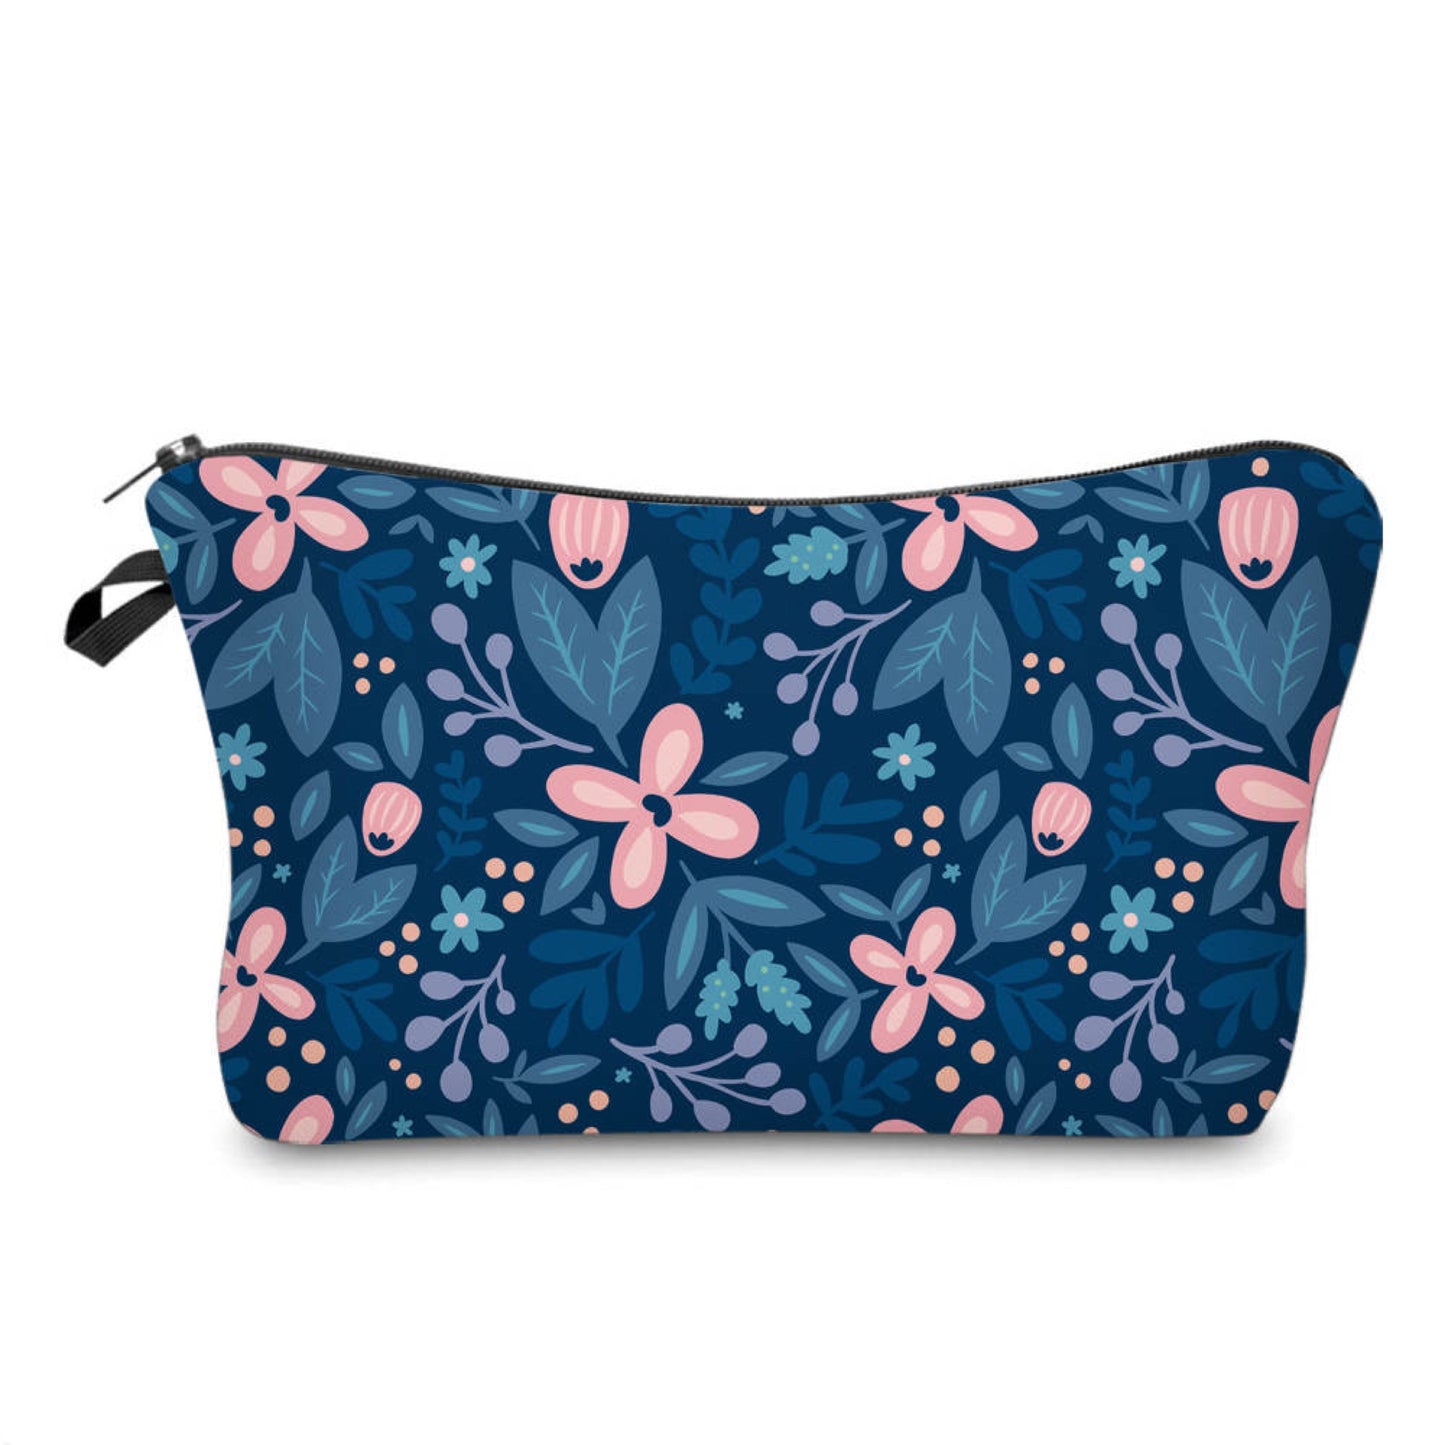 Pouch - Floral Navy Blue Pink